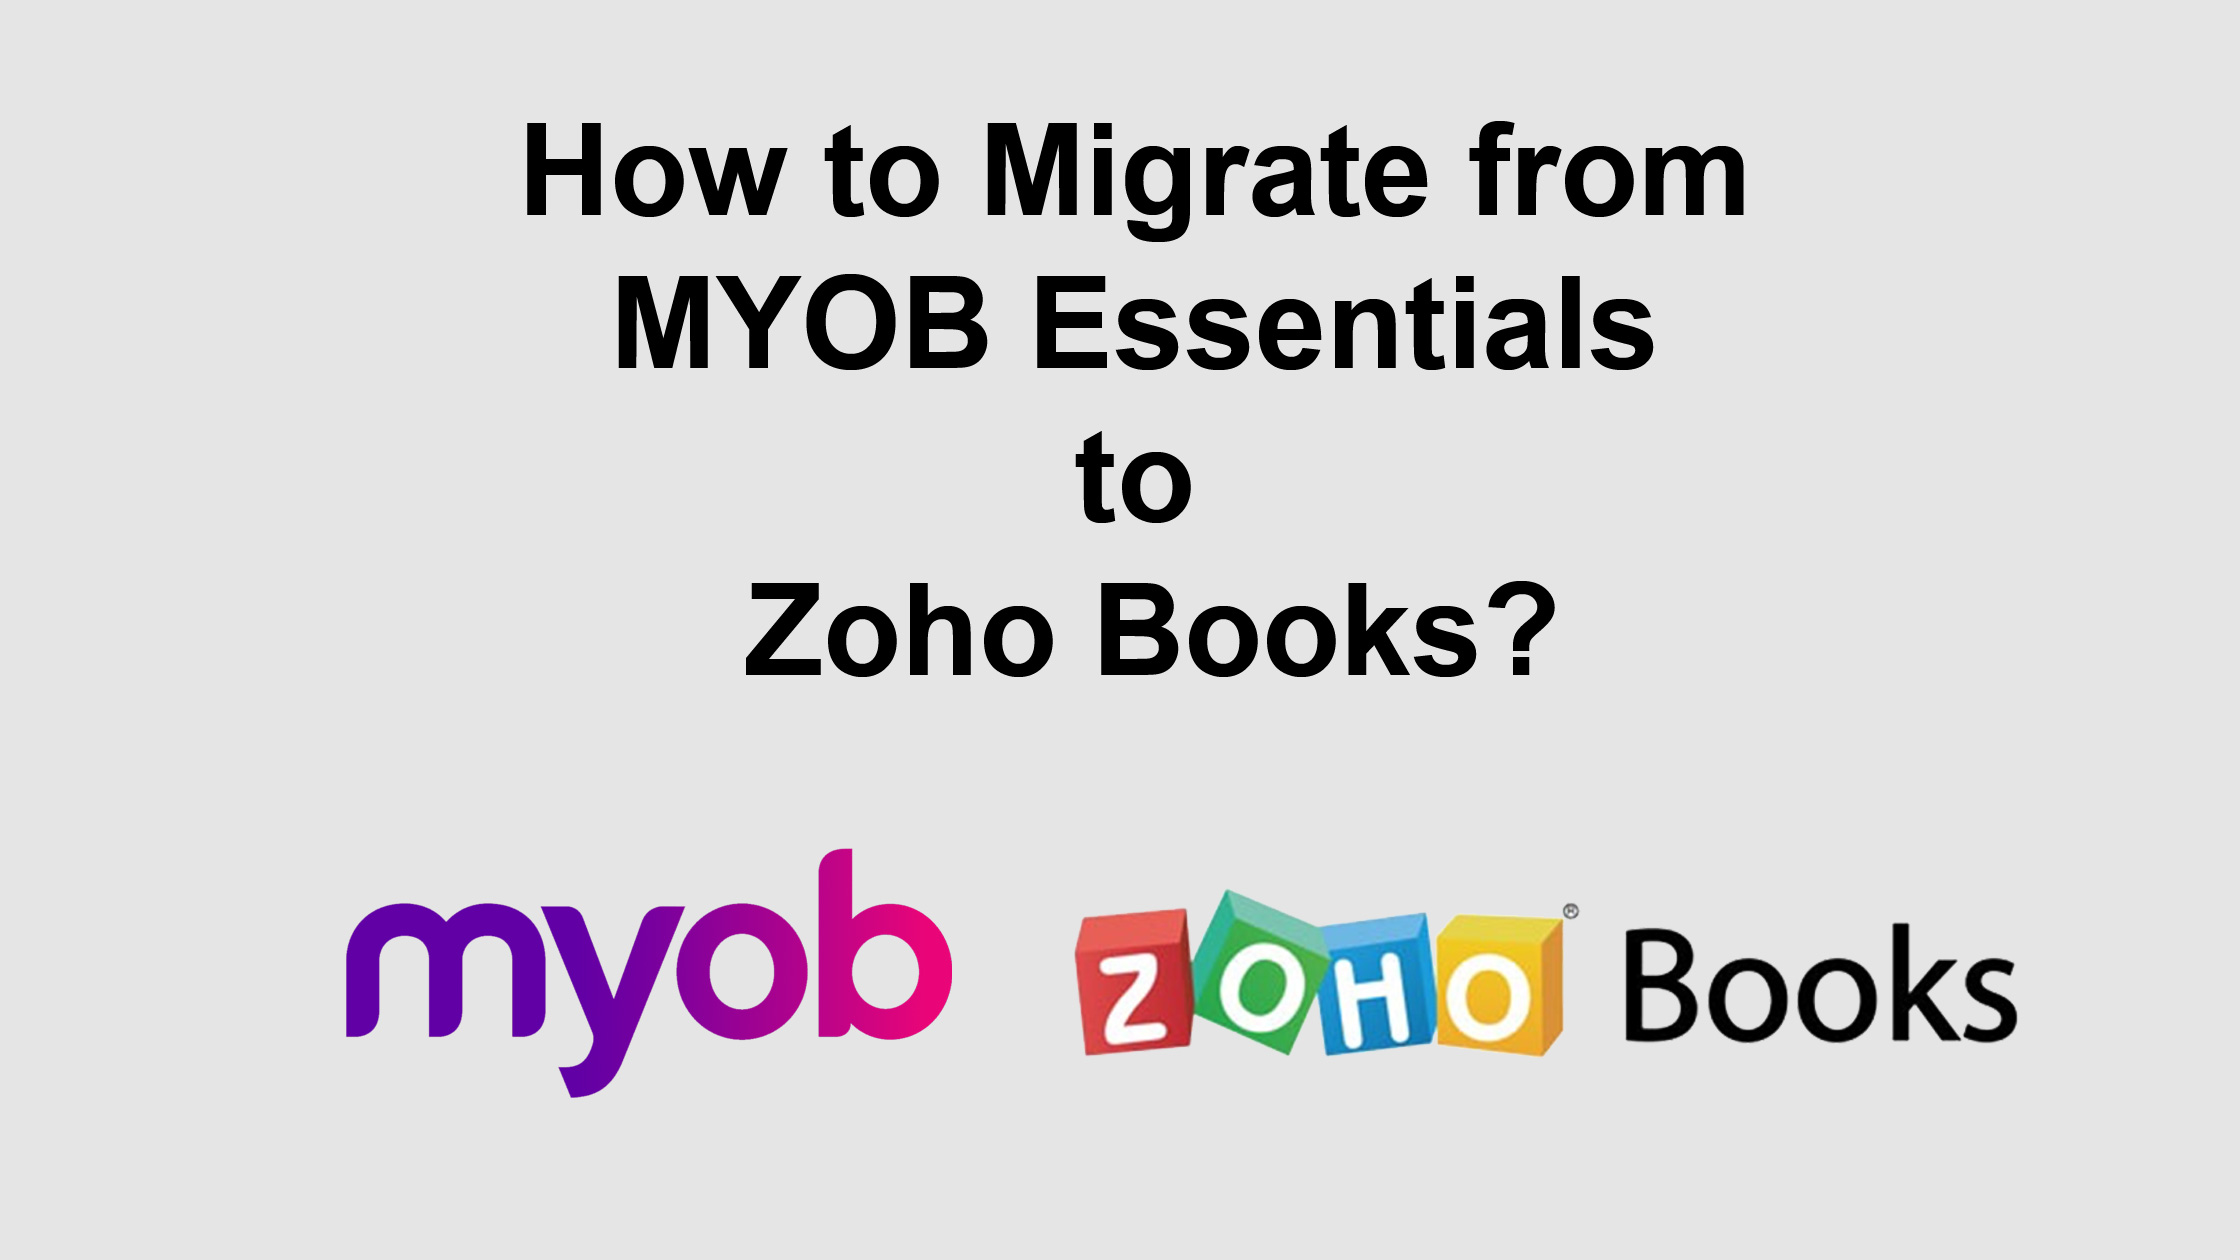 How to Migrate from MYOB Essentials to Zoho Books?